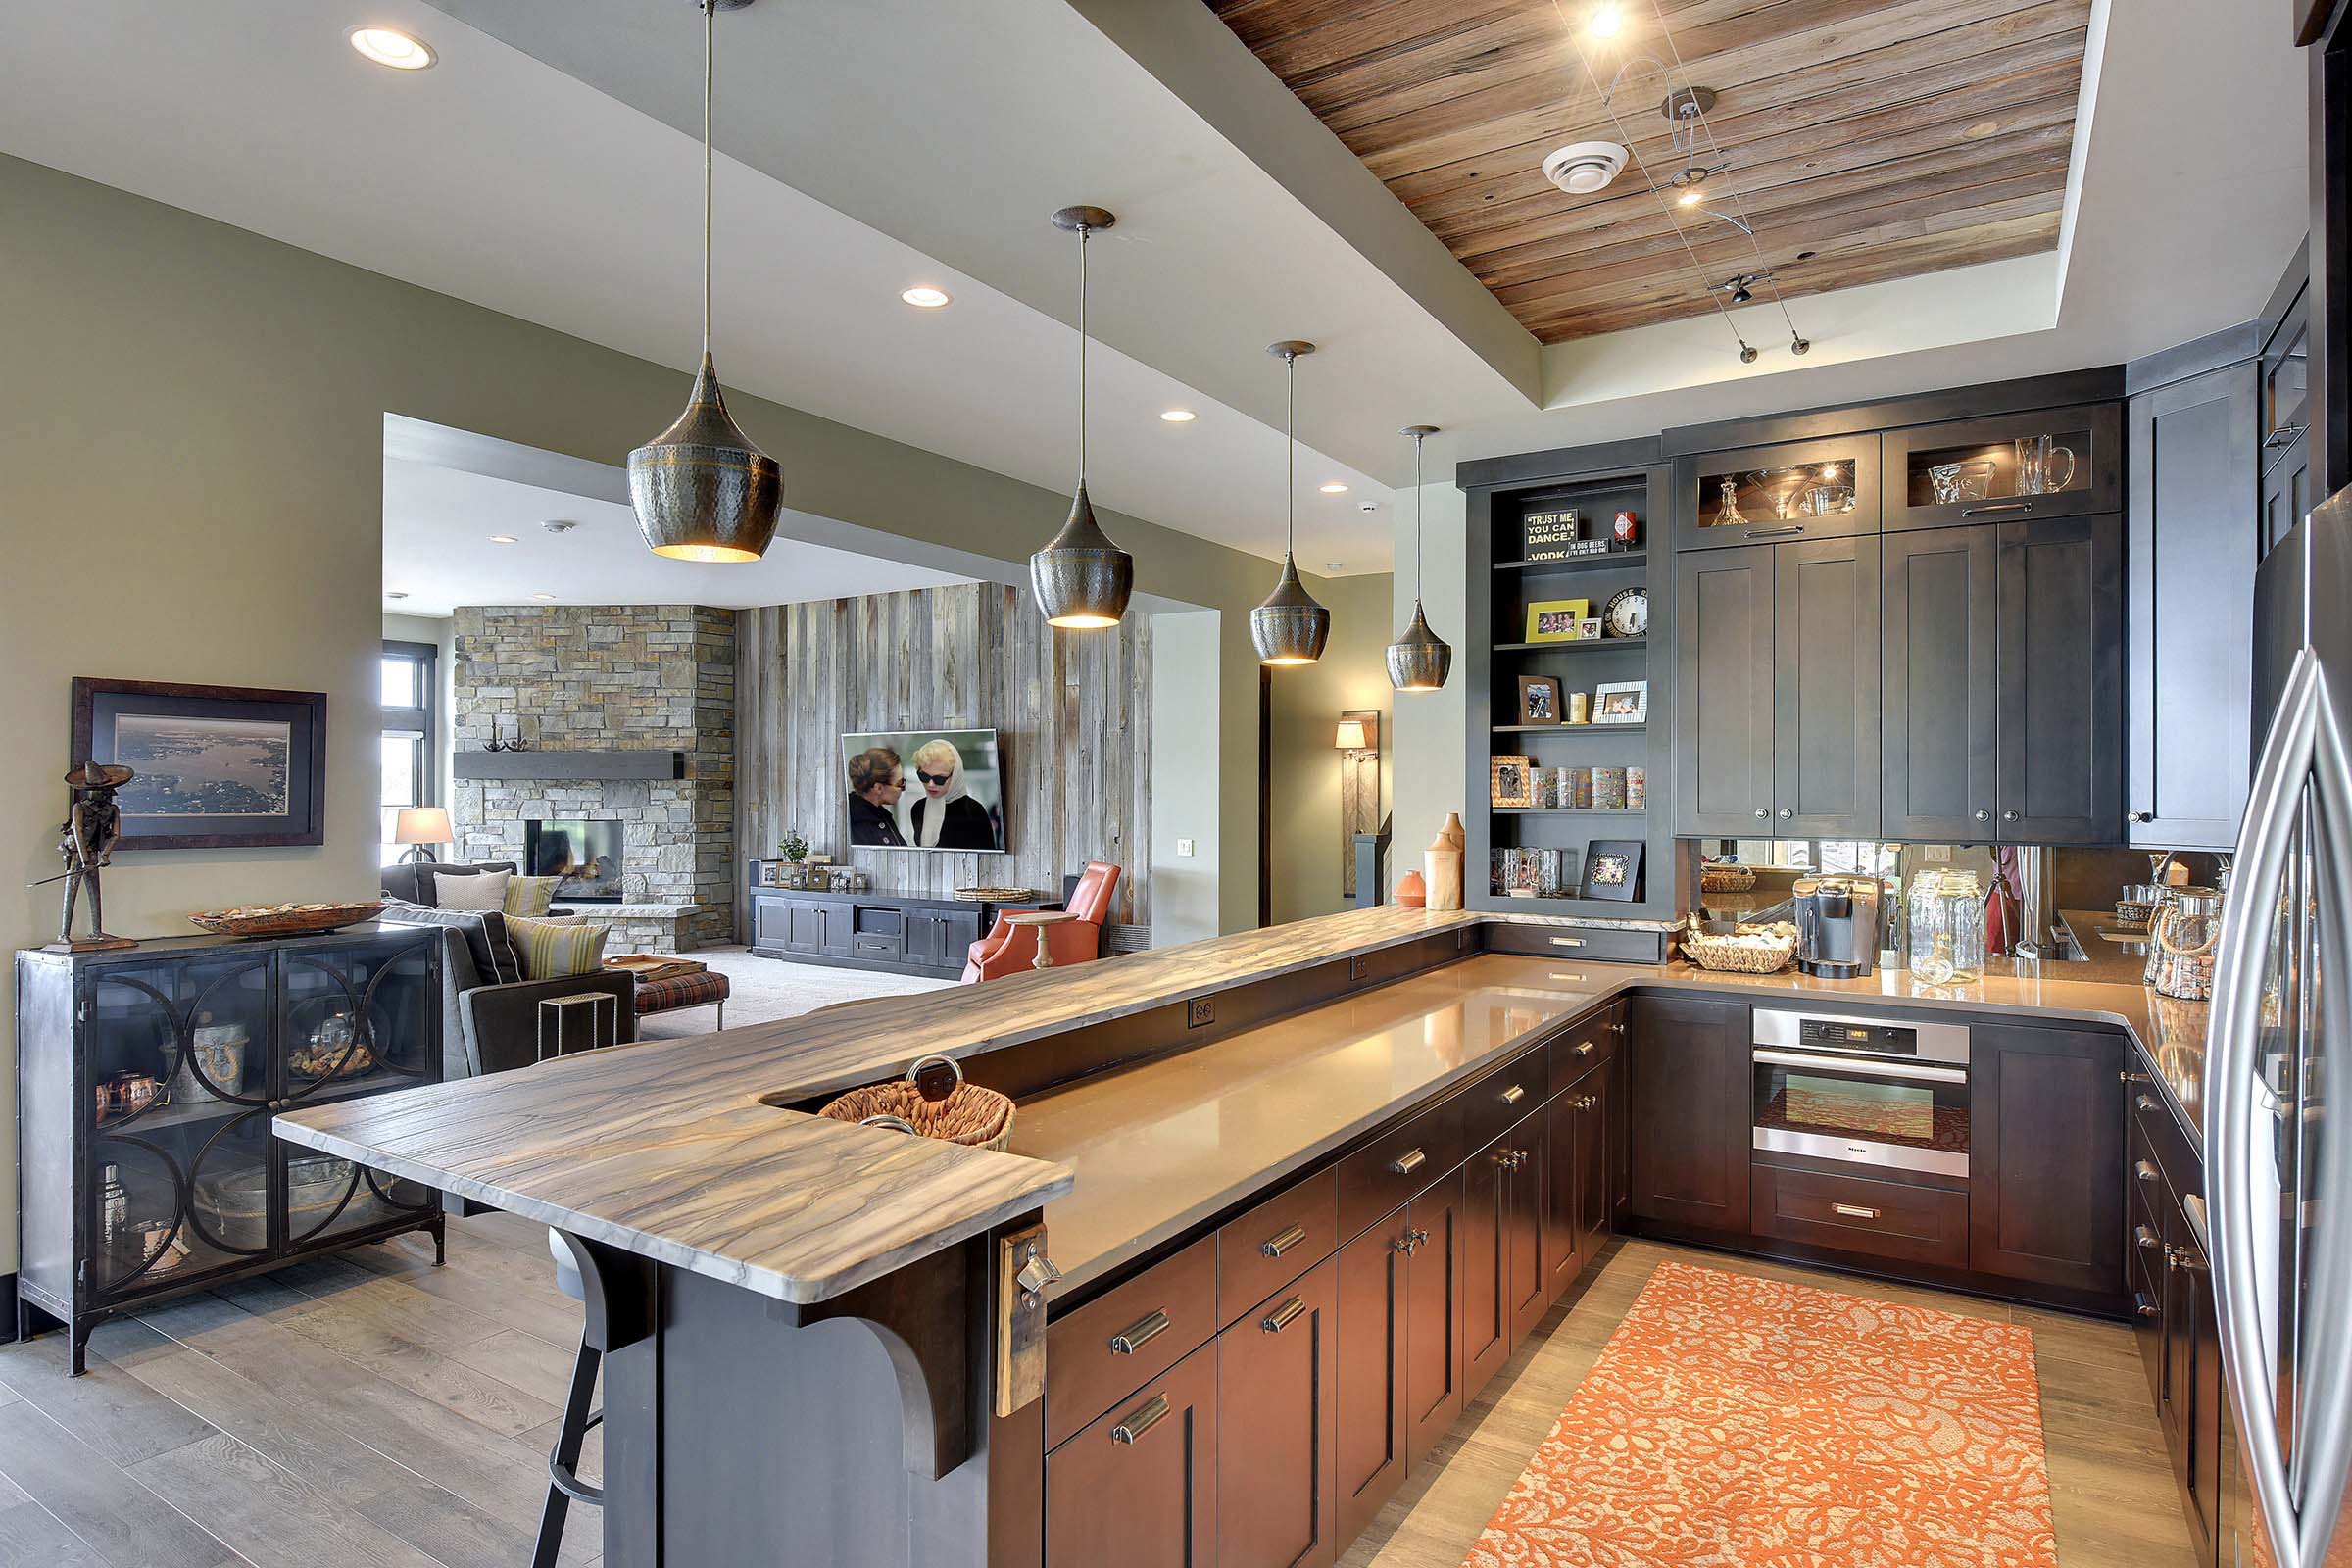 Modern kitchen with rustic hardwood floors, wood inset ceiling and plenty of seating at the counter.